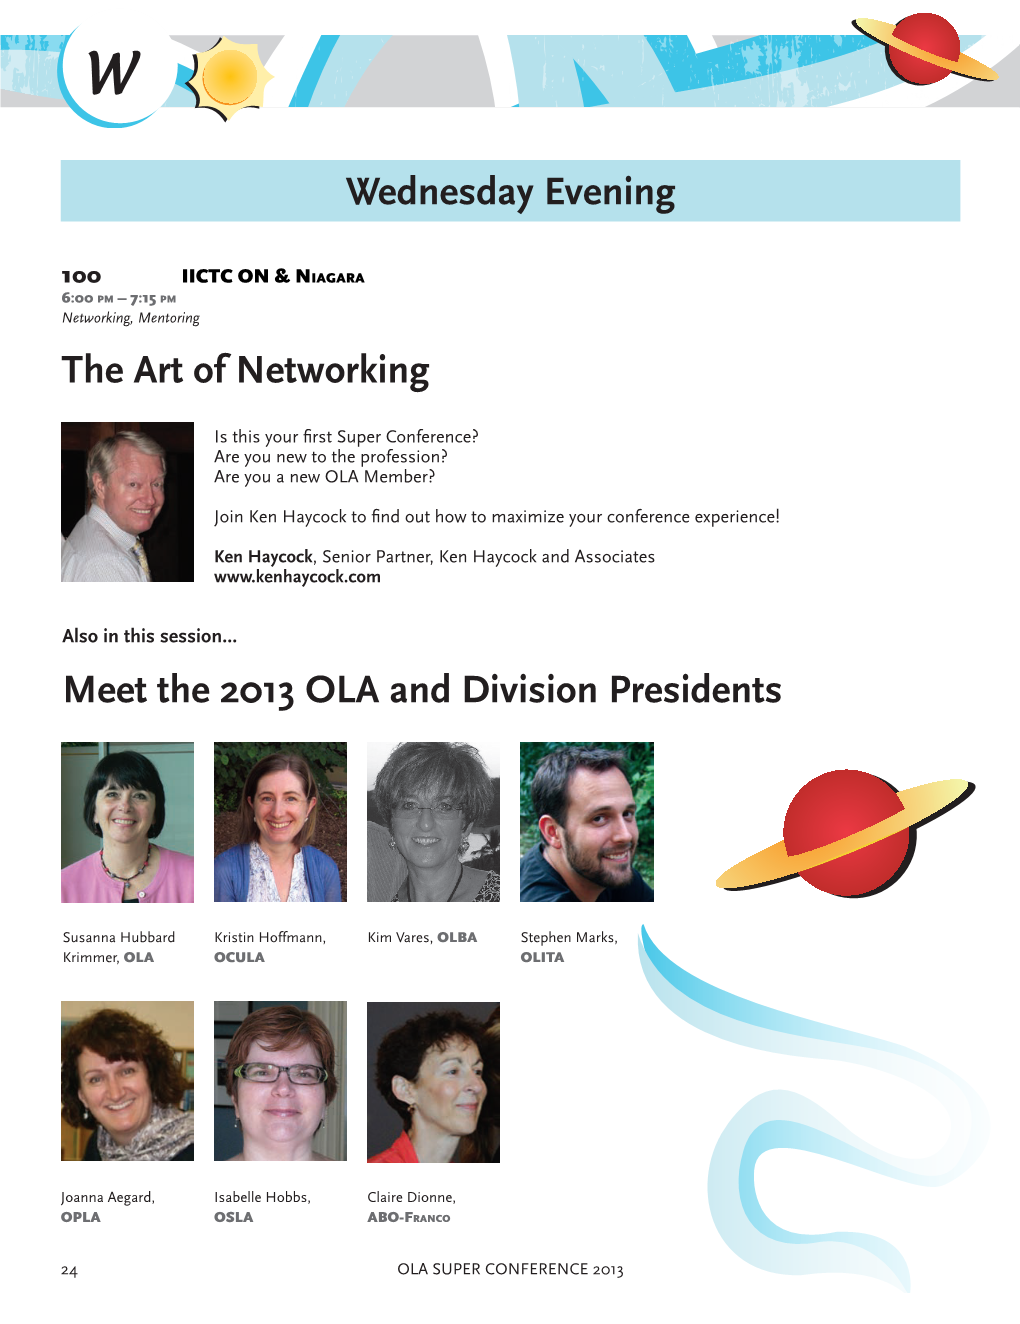 Wednesday Evening the Art of Networking Meet the 2013 OLA and Division Presidents